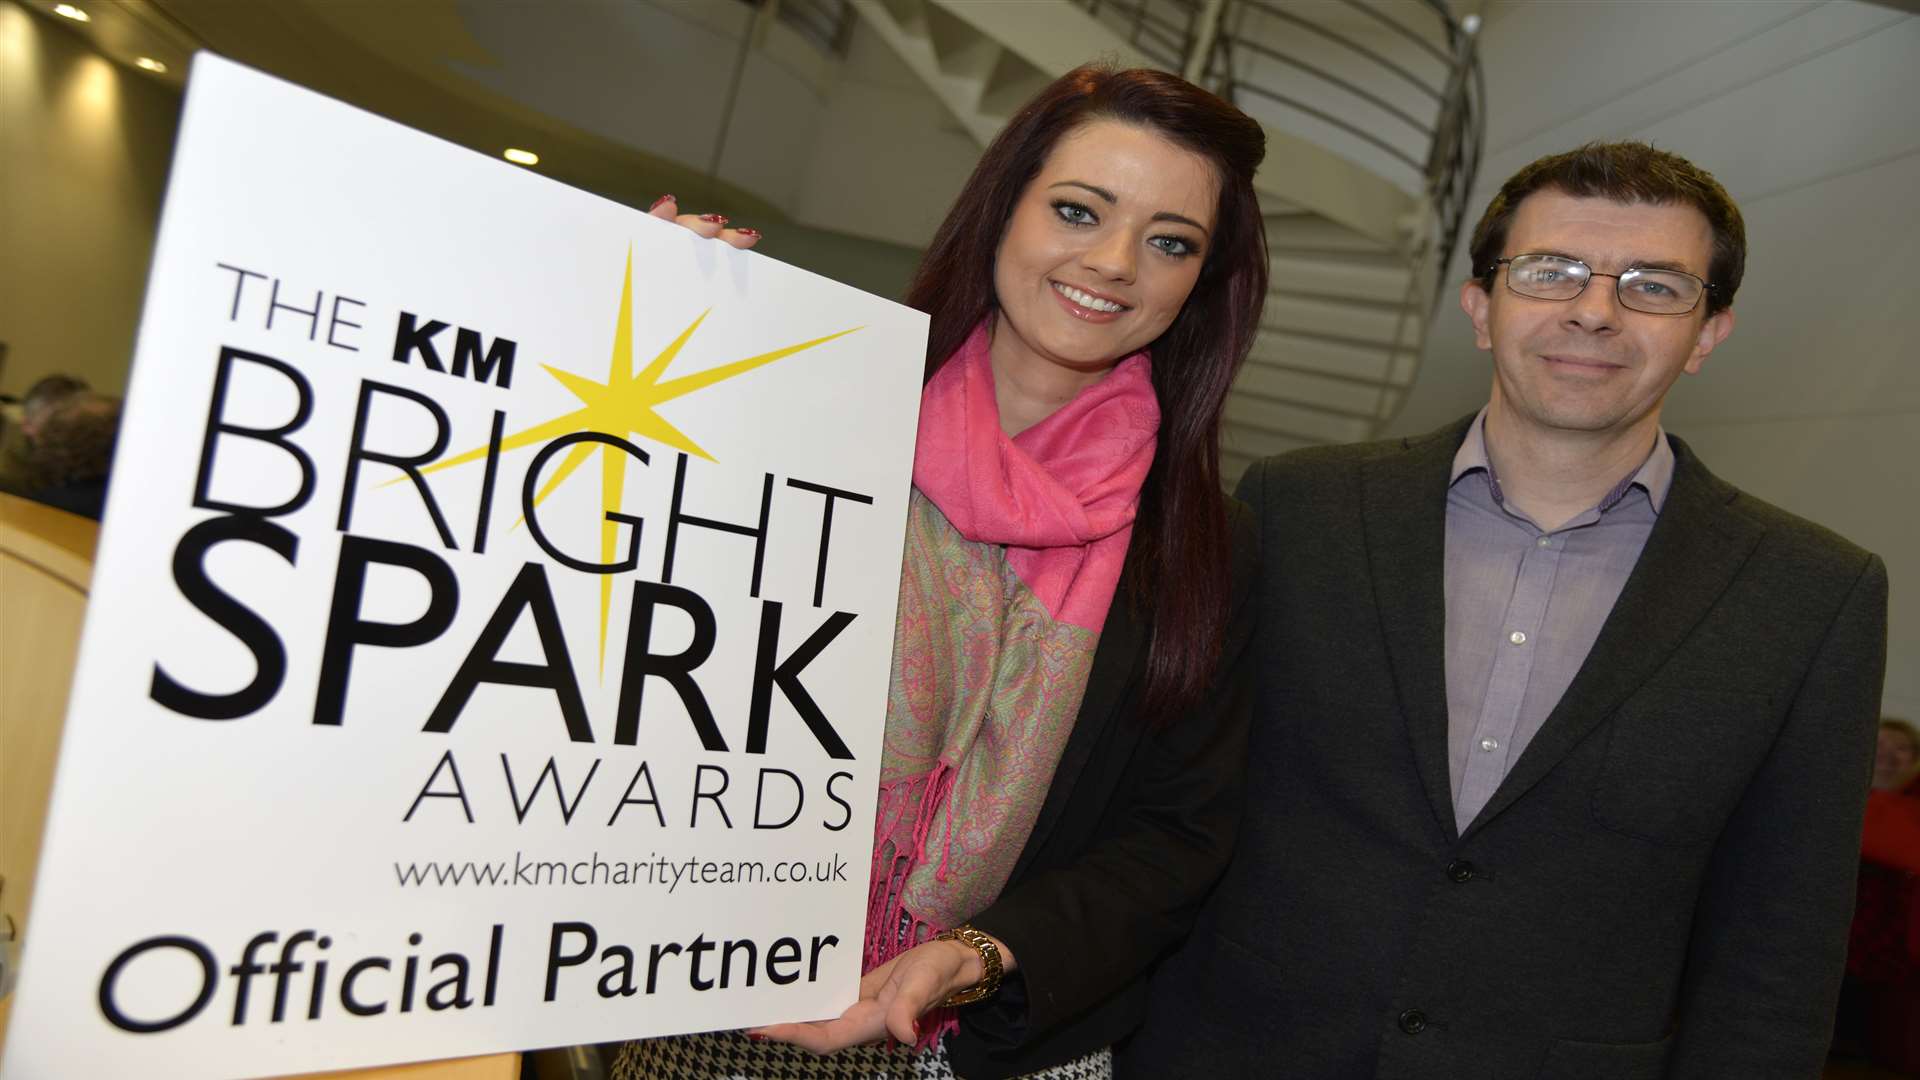 Chantal Rozard and Paul Gannaway from Betteridge and Milsom are backing the KM Bright Spark Awards.